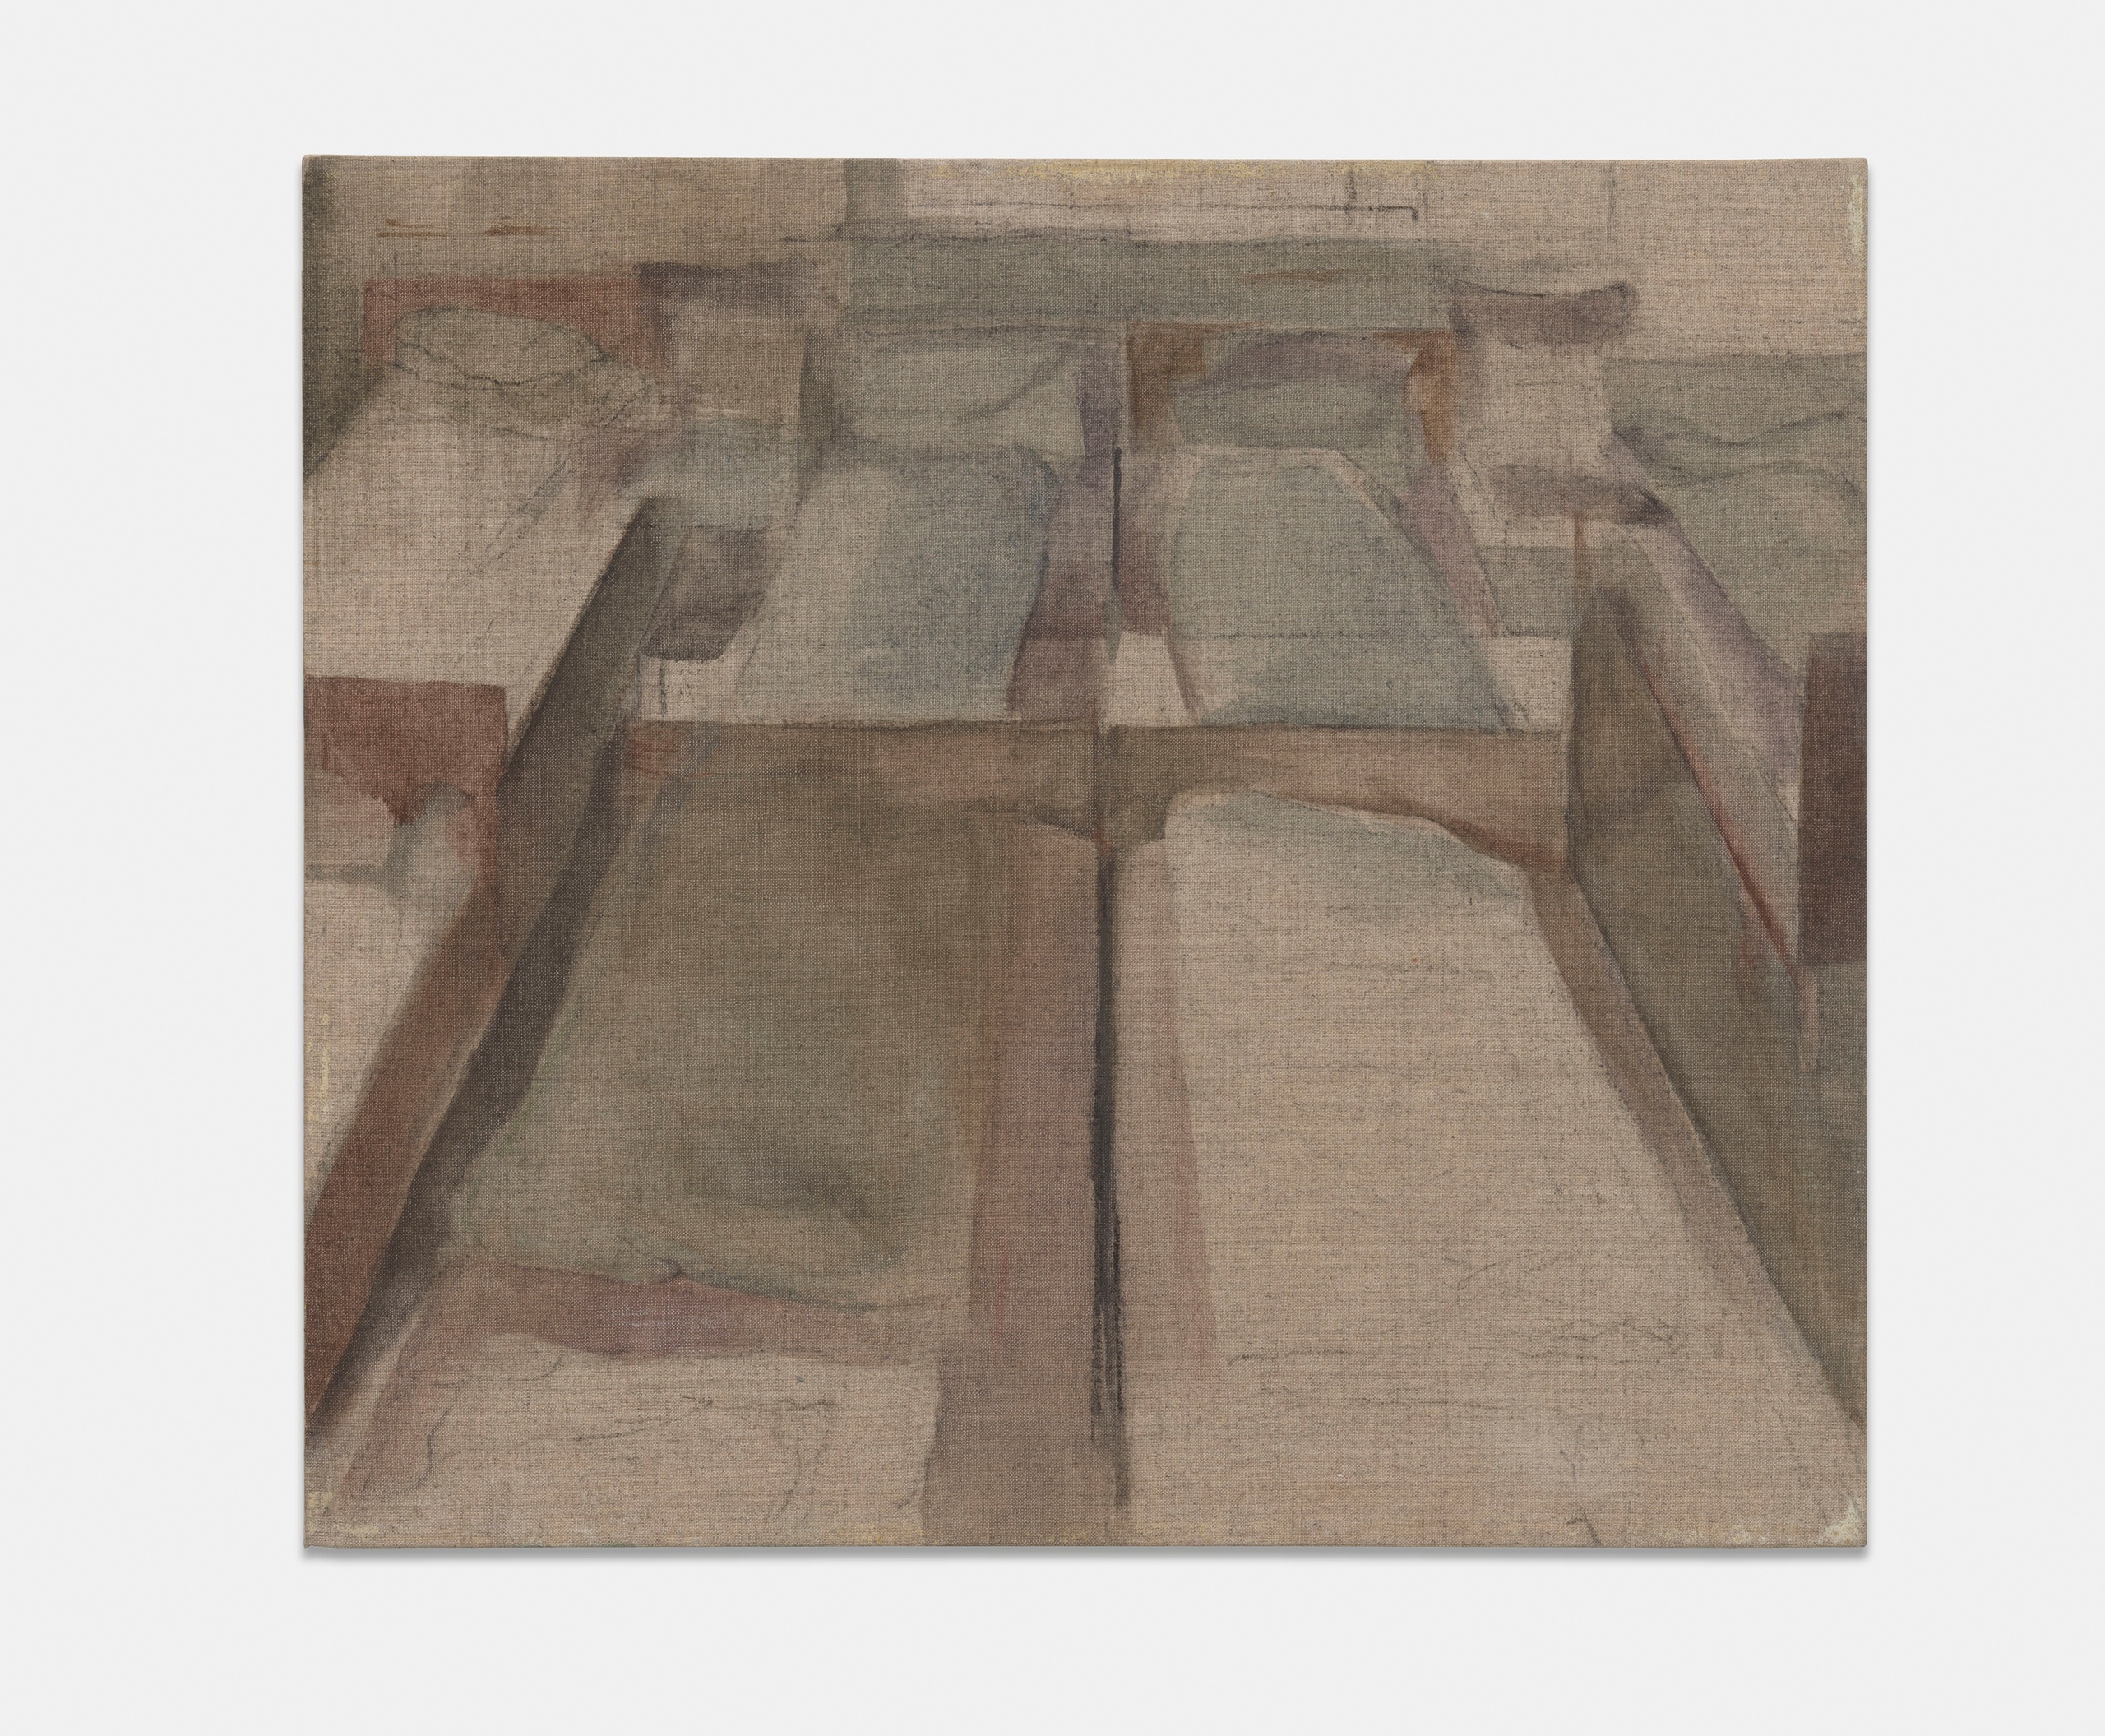 Beaux MendesHaus Gottesehre, 2022distemper and charcoal on linen36 x 40 cm | 14 1/4 x 15 3/4 in